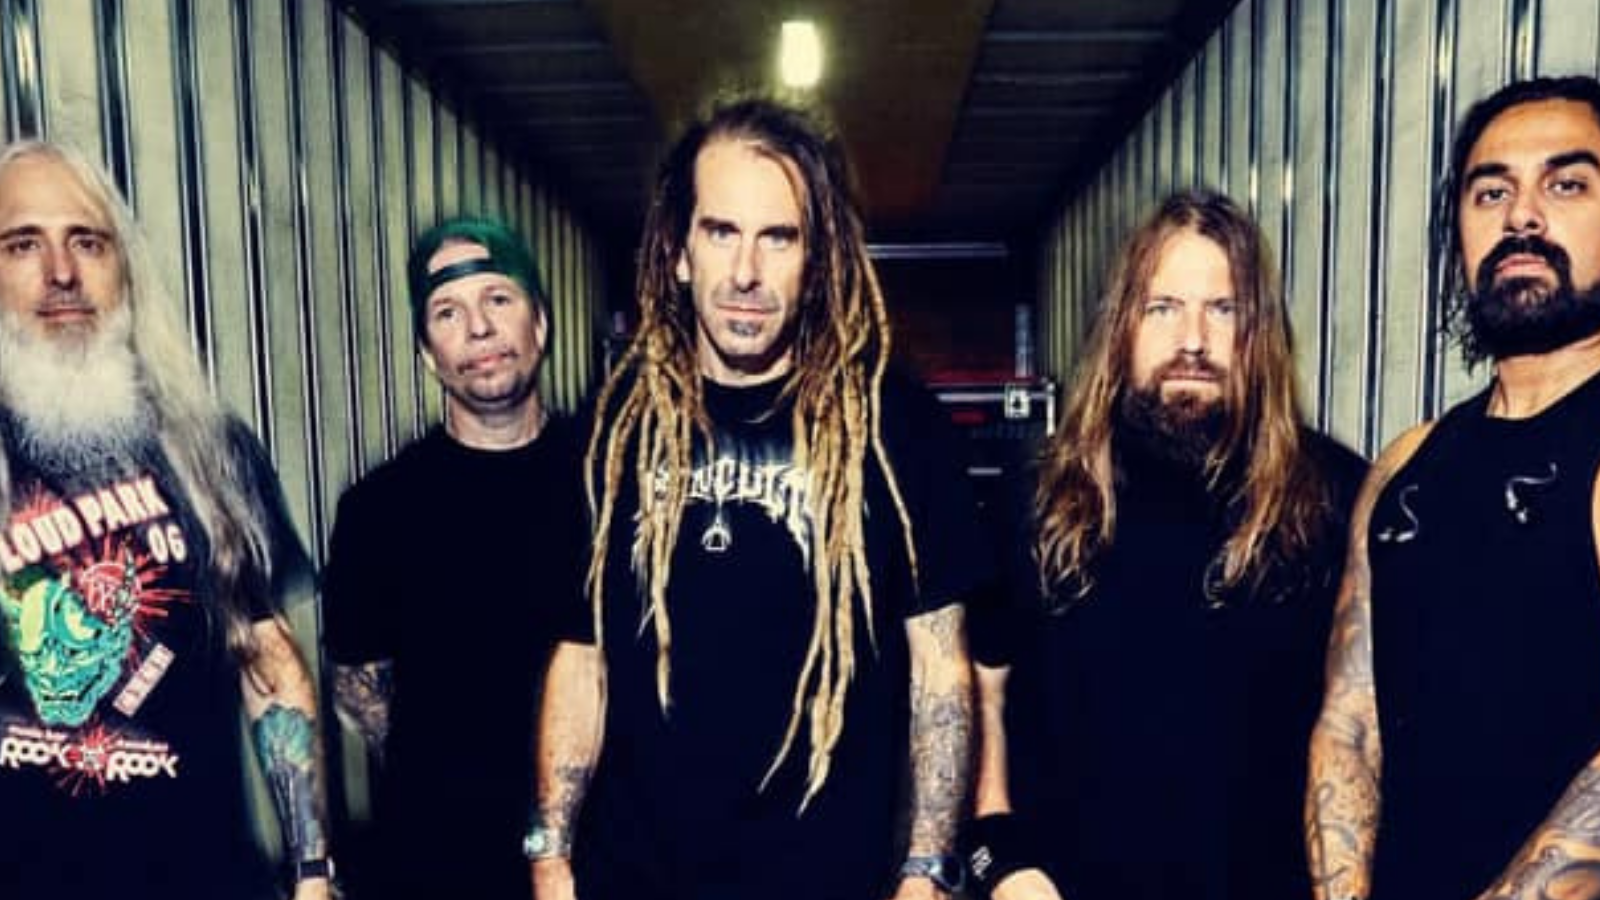 You are currently viewing LAMB OF GOD release music video for “Ditch” – New album out now.